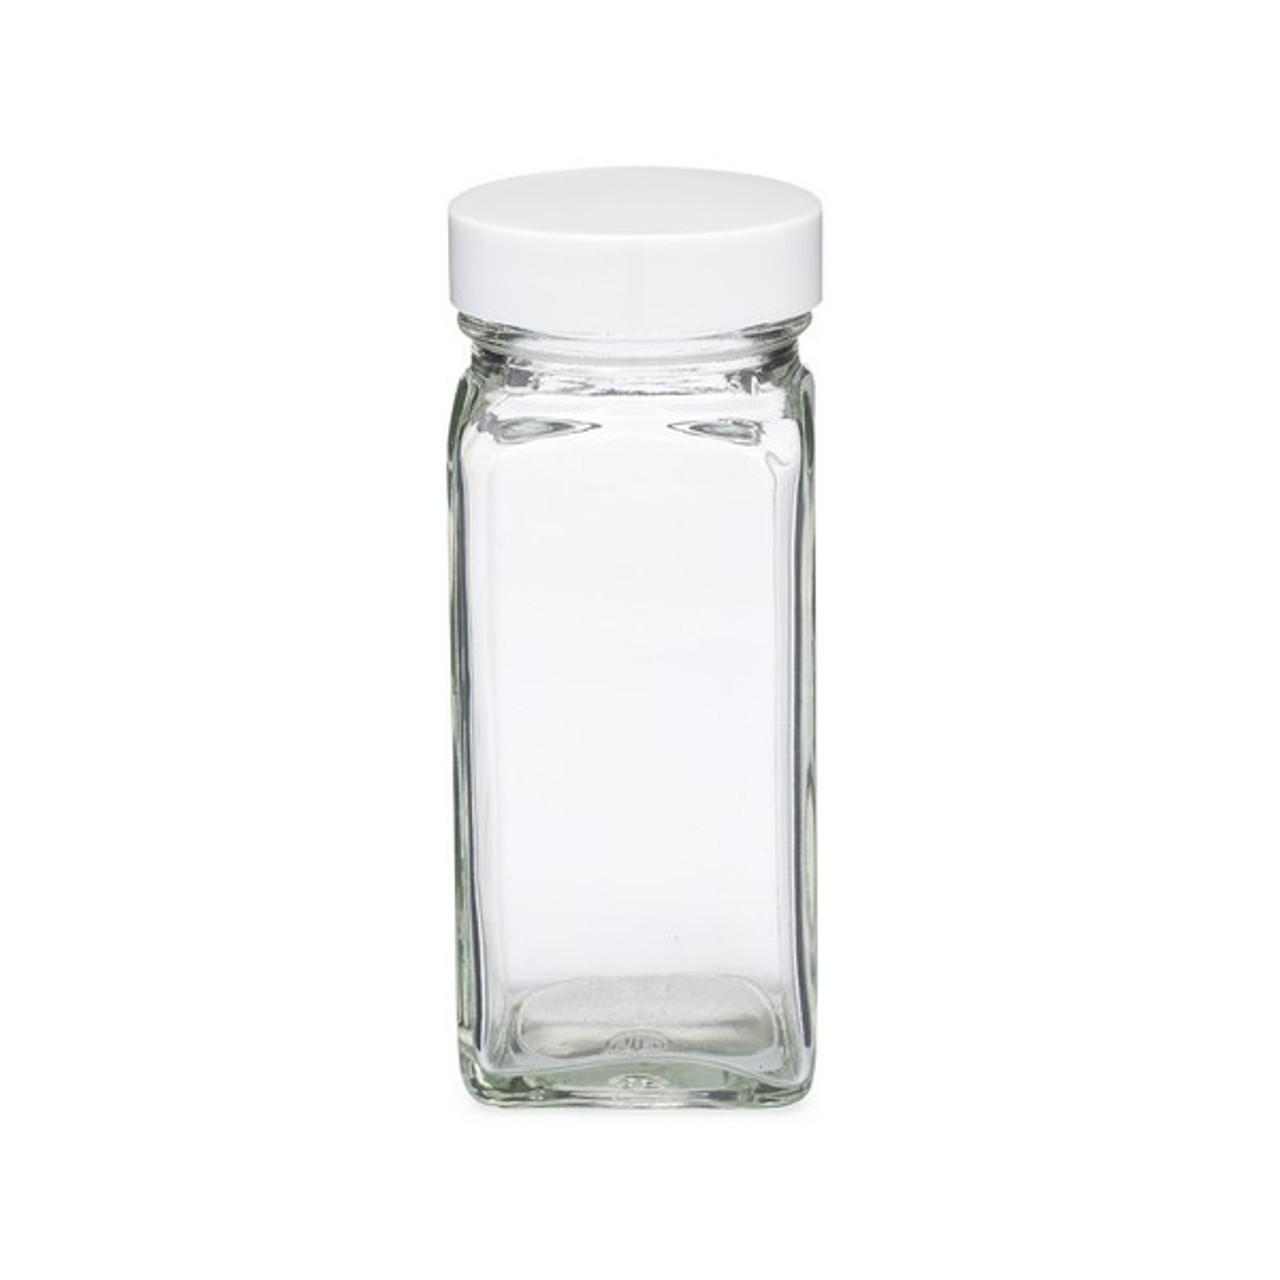 4 oz Clear Square Glass Spice Jars (White Metal Cap) - 12/Case, Clear Type III 43-485